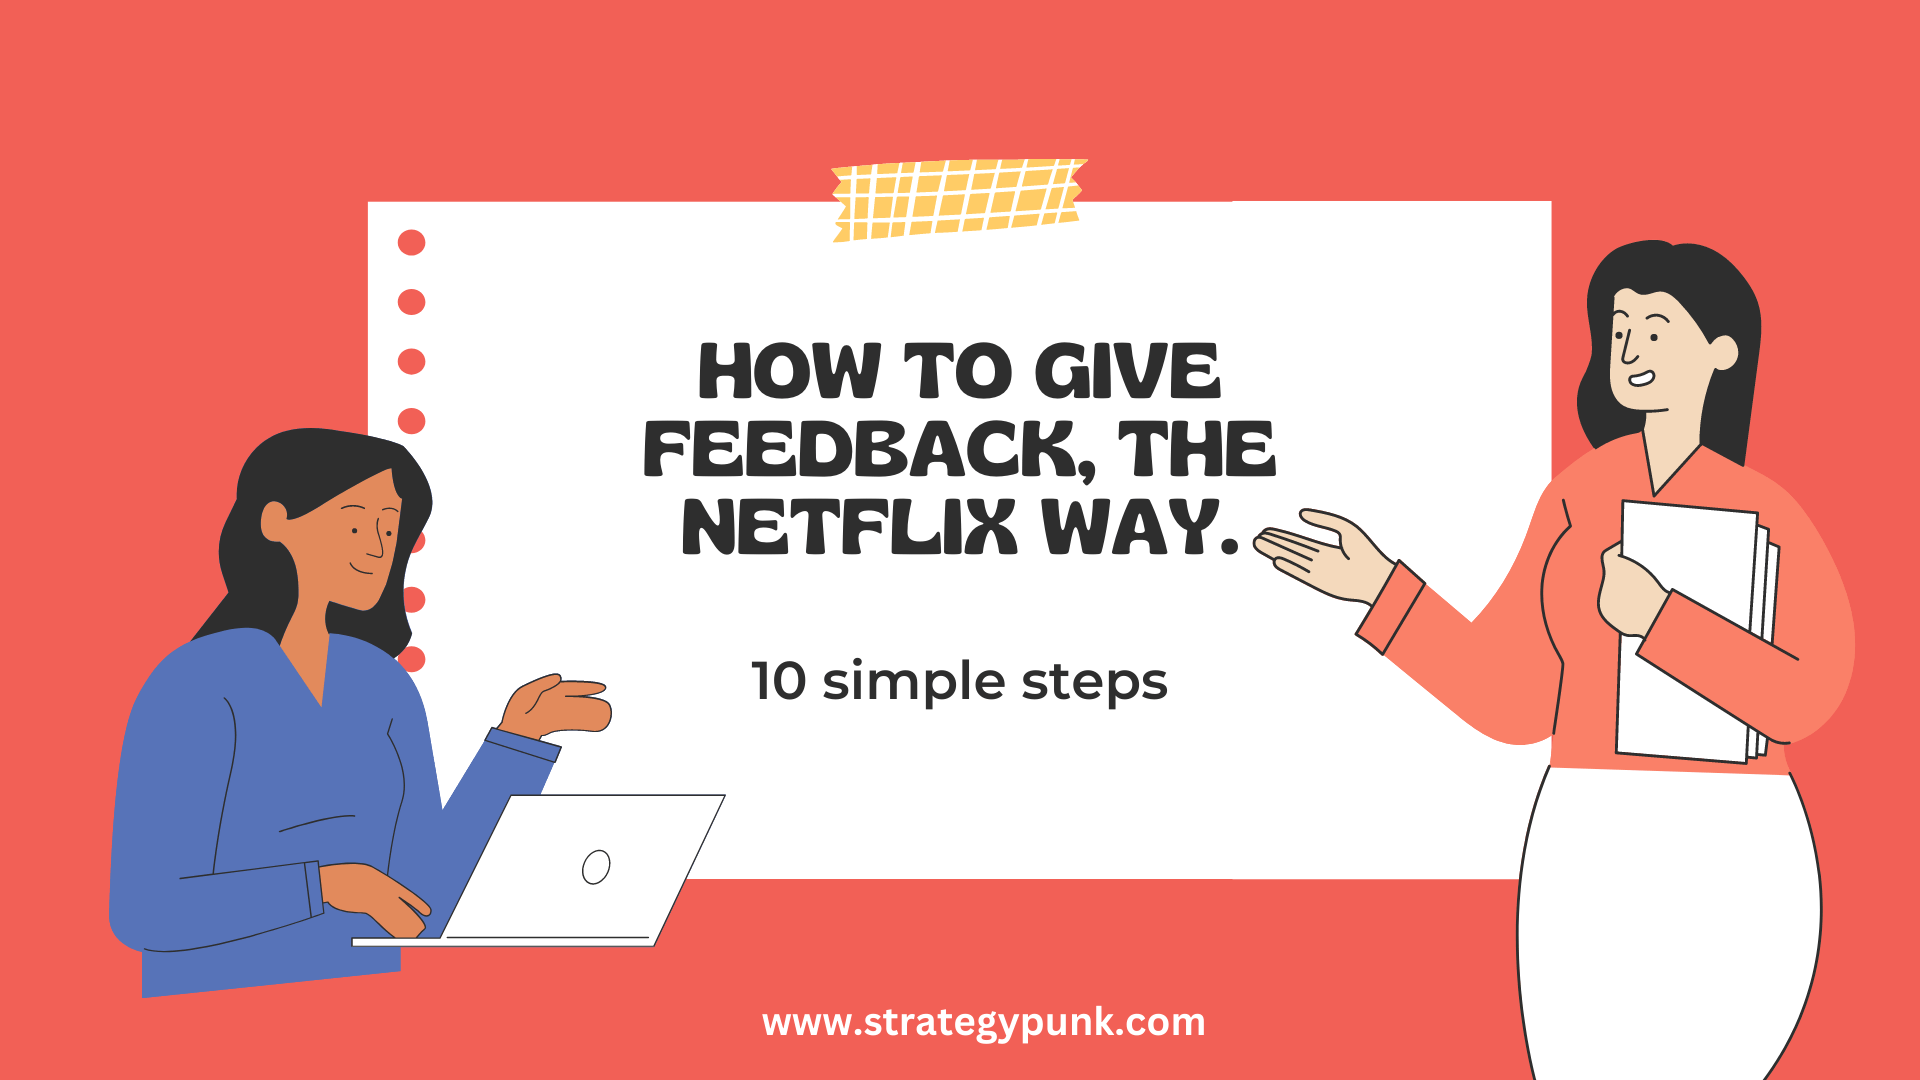 How to give feedback, the Netflix way.